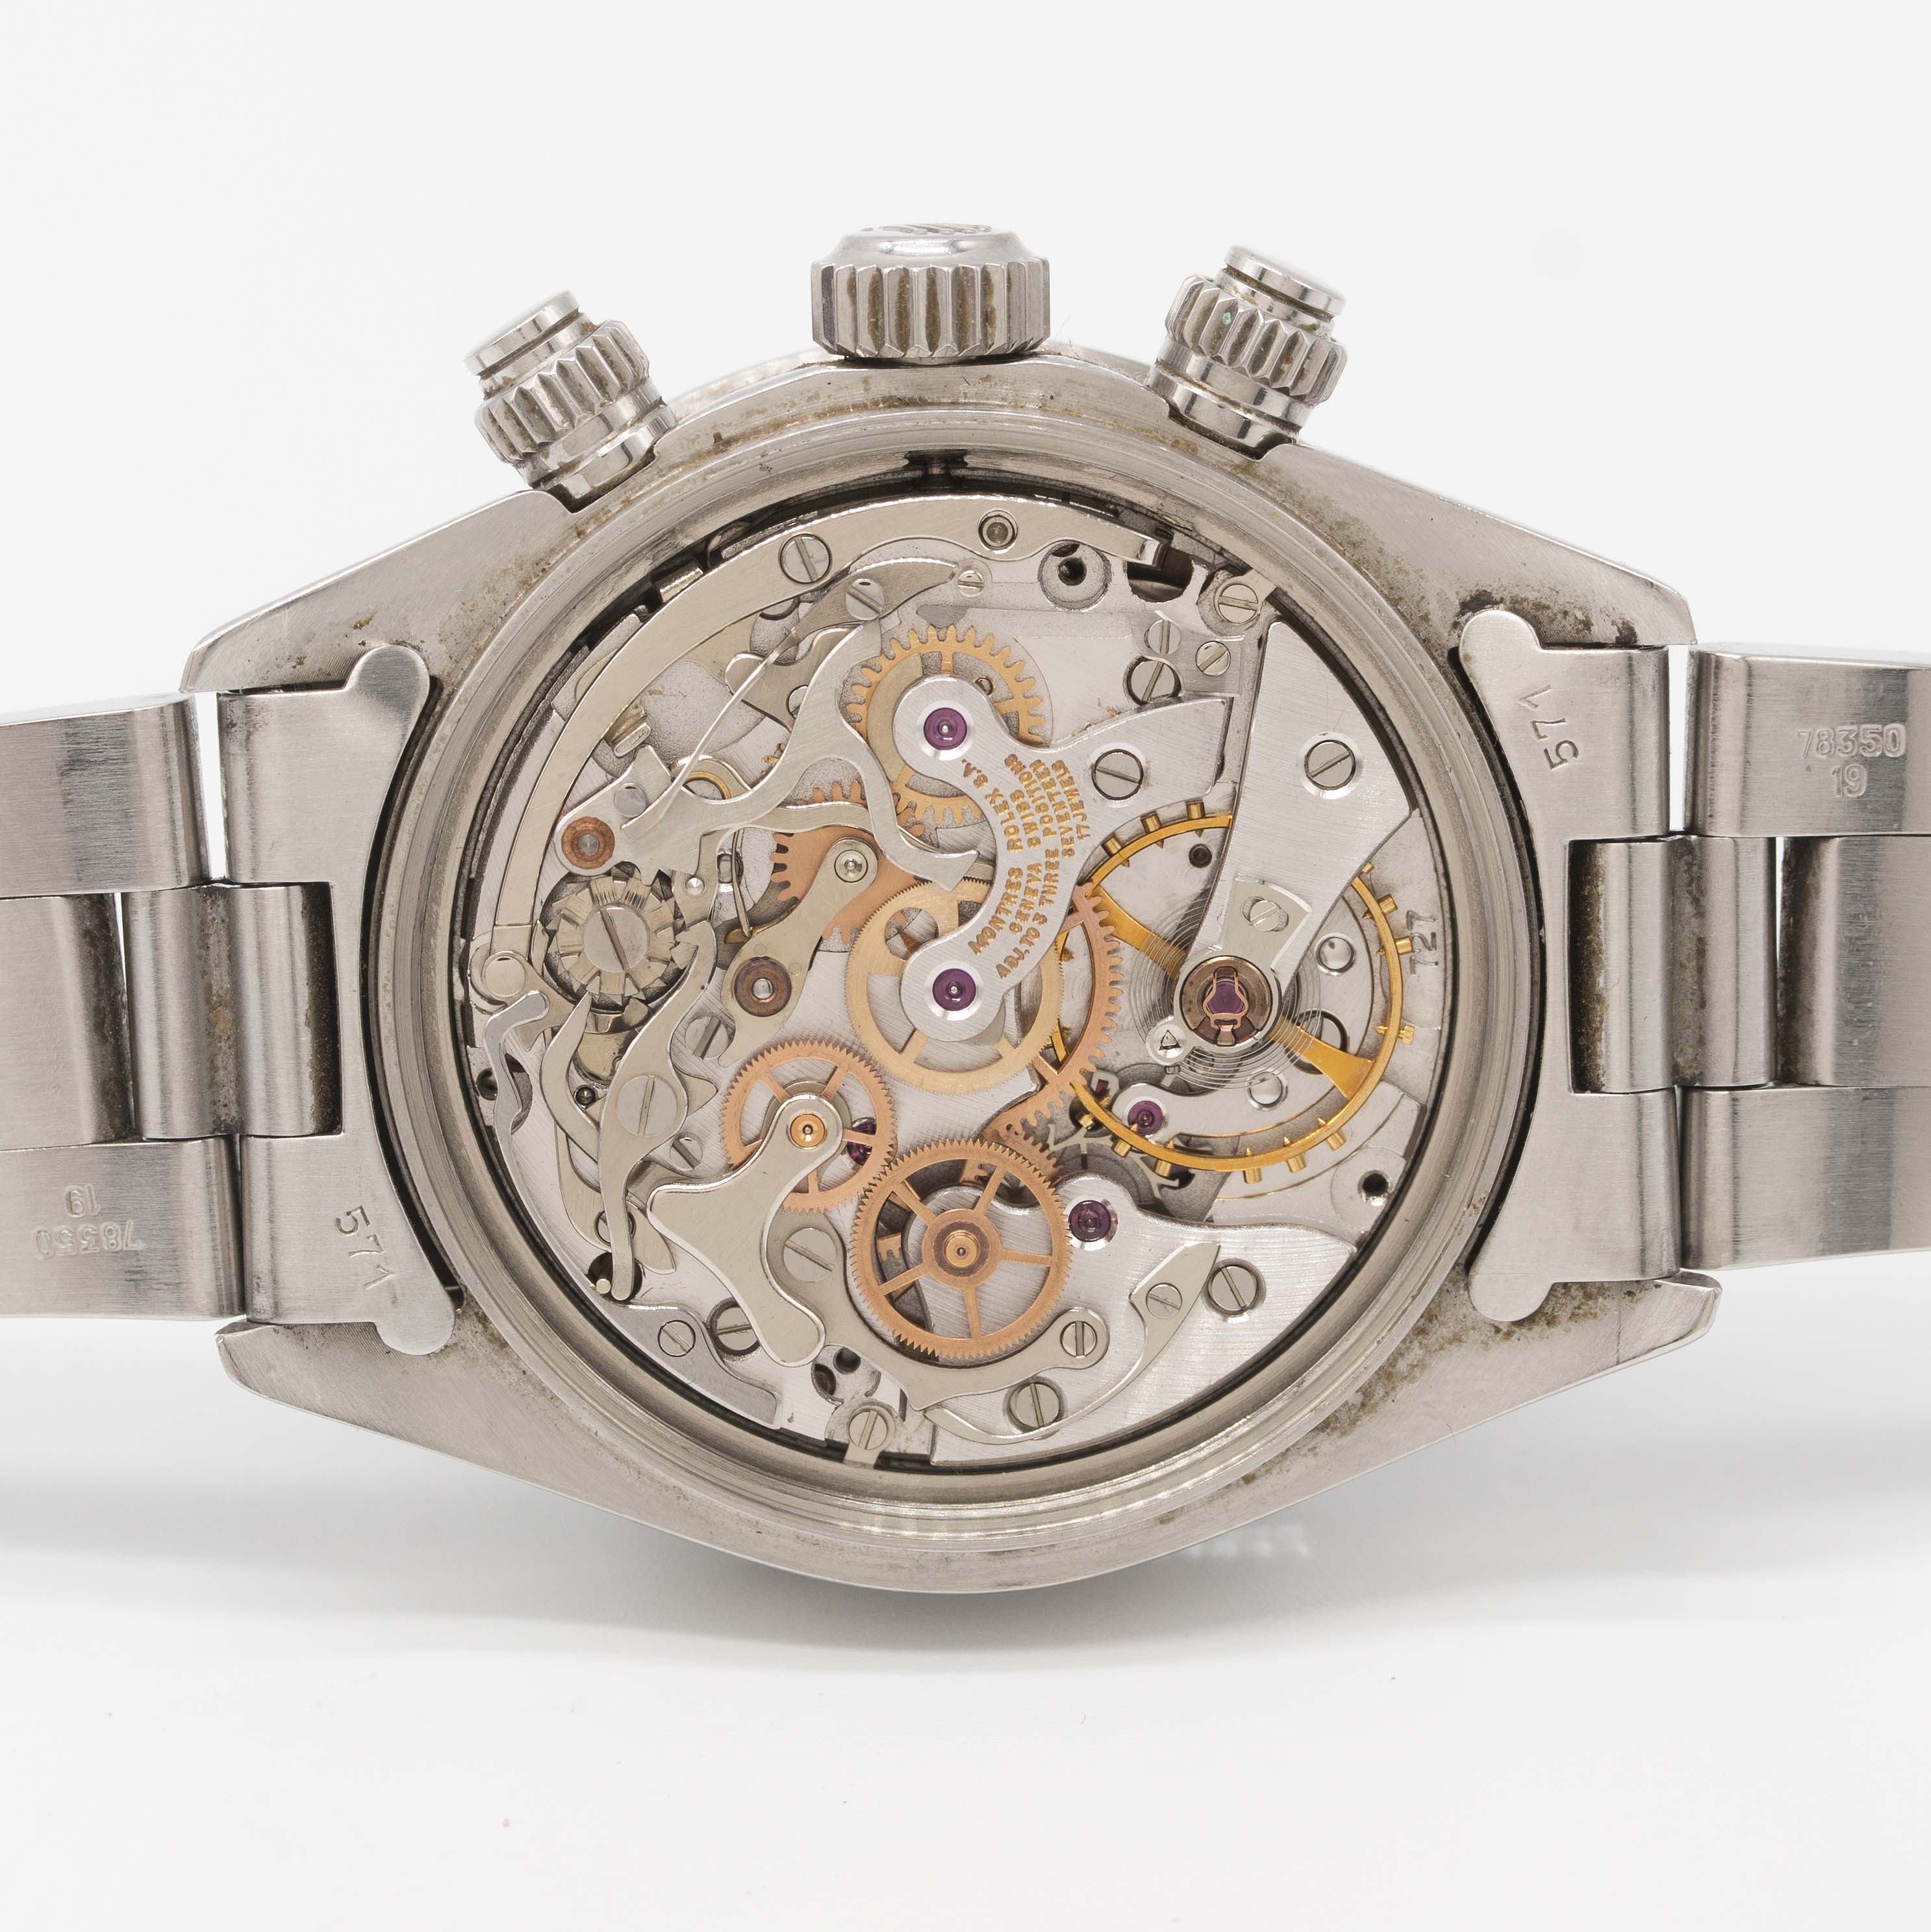 A VERY RARE GENTLEMAN'S STAINLESS STEEL ROLEX OYSTER COSMOGRAPH DAYTONA BRACELET WATCH CIRCA 1979, - Image 9 of 12